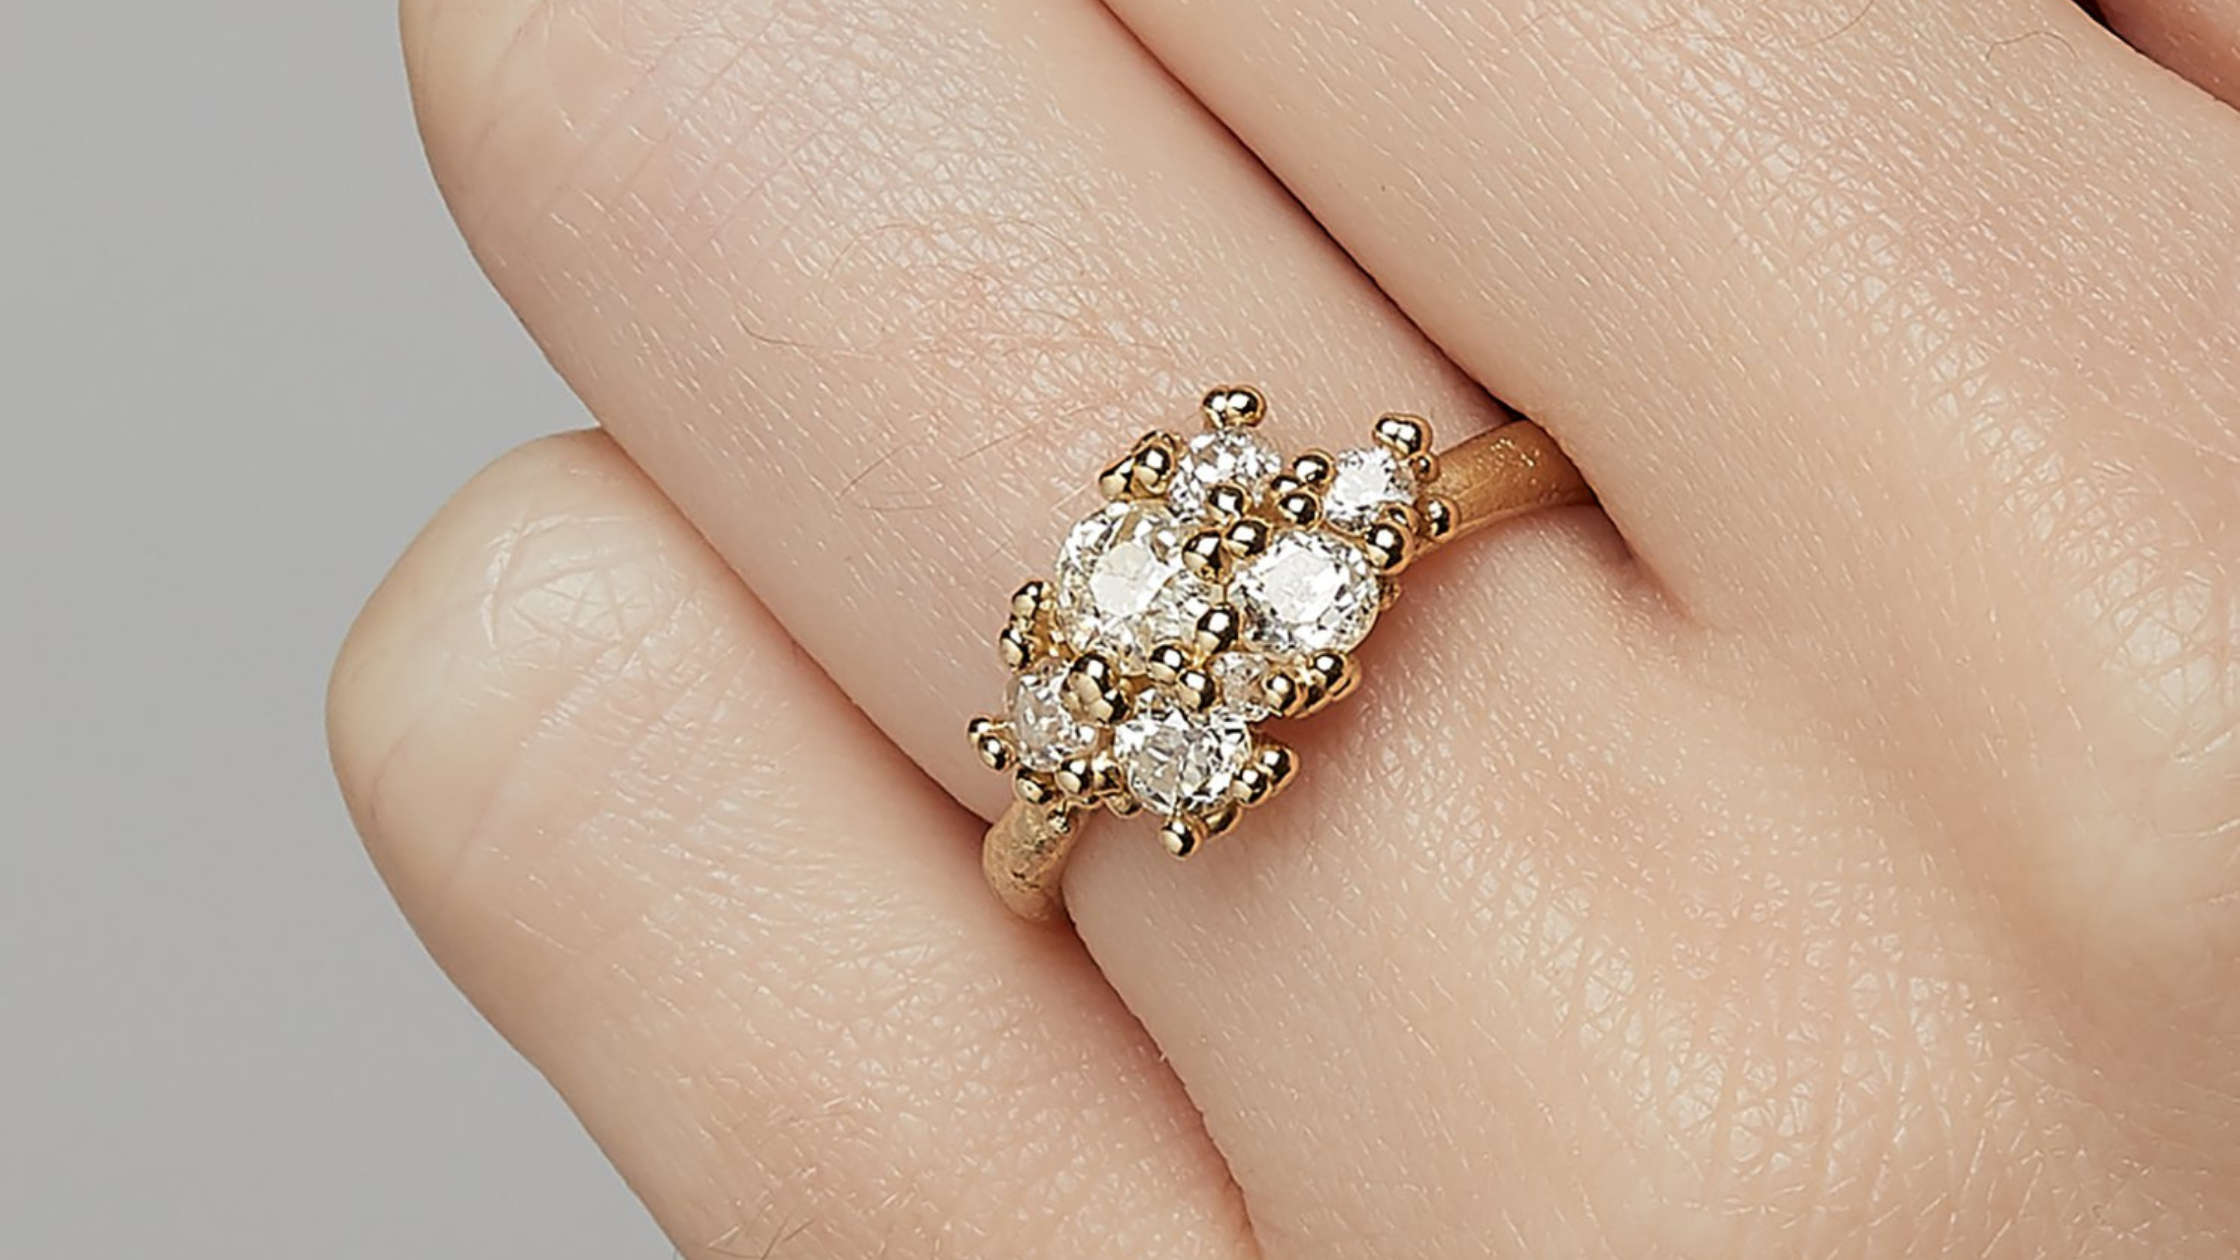 What Are Diamond Cluster Rings?